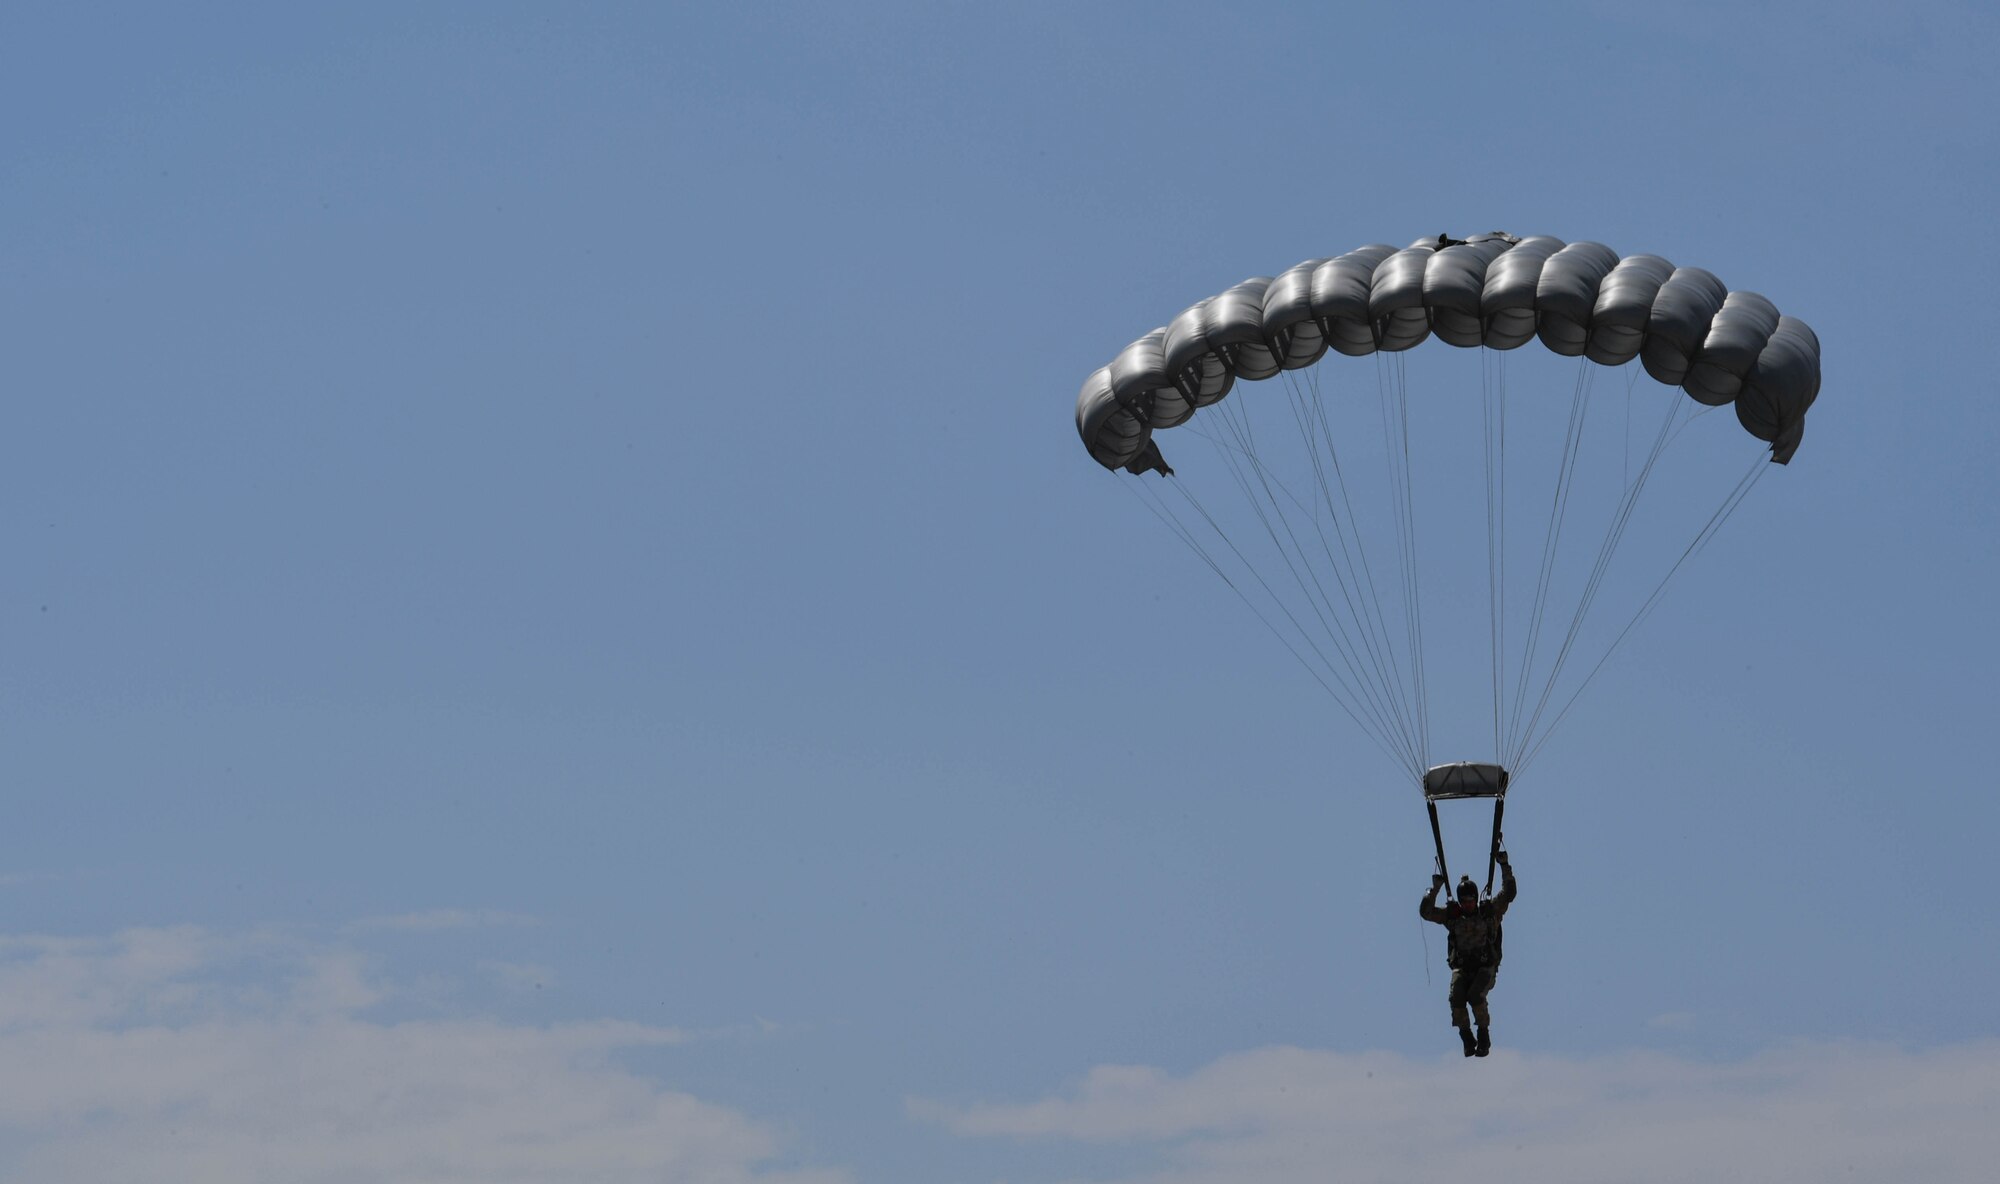 A Greek paratrooper descends to the ground after conducting a military free-fall jump out of a U.S. Air Force C-130J Super Hercules during Exercise Stolen Cerberus IV above Megara, Greece, April 22, 2017. The U.S. Air Force and Army have worked alongside the Hellenic air force to perform personnel and cargo drops throughout the exercise. These interoperability air exercises help to maintain joint readiness. (U.S Air Force photo by Senior Airman Tryphena Mayhugh)